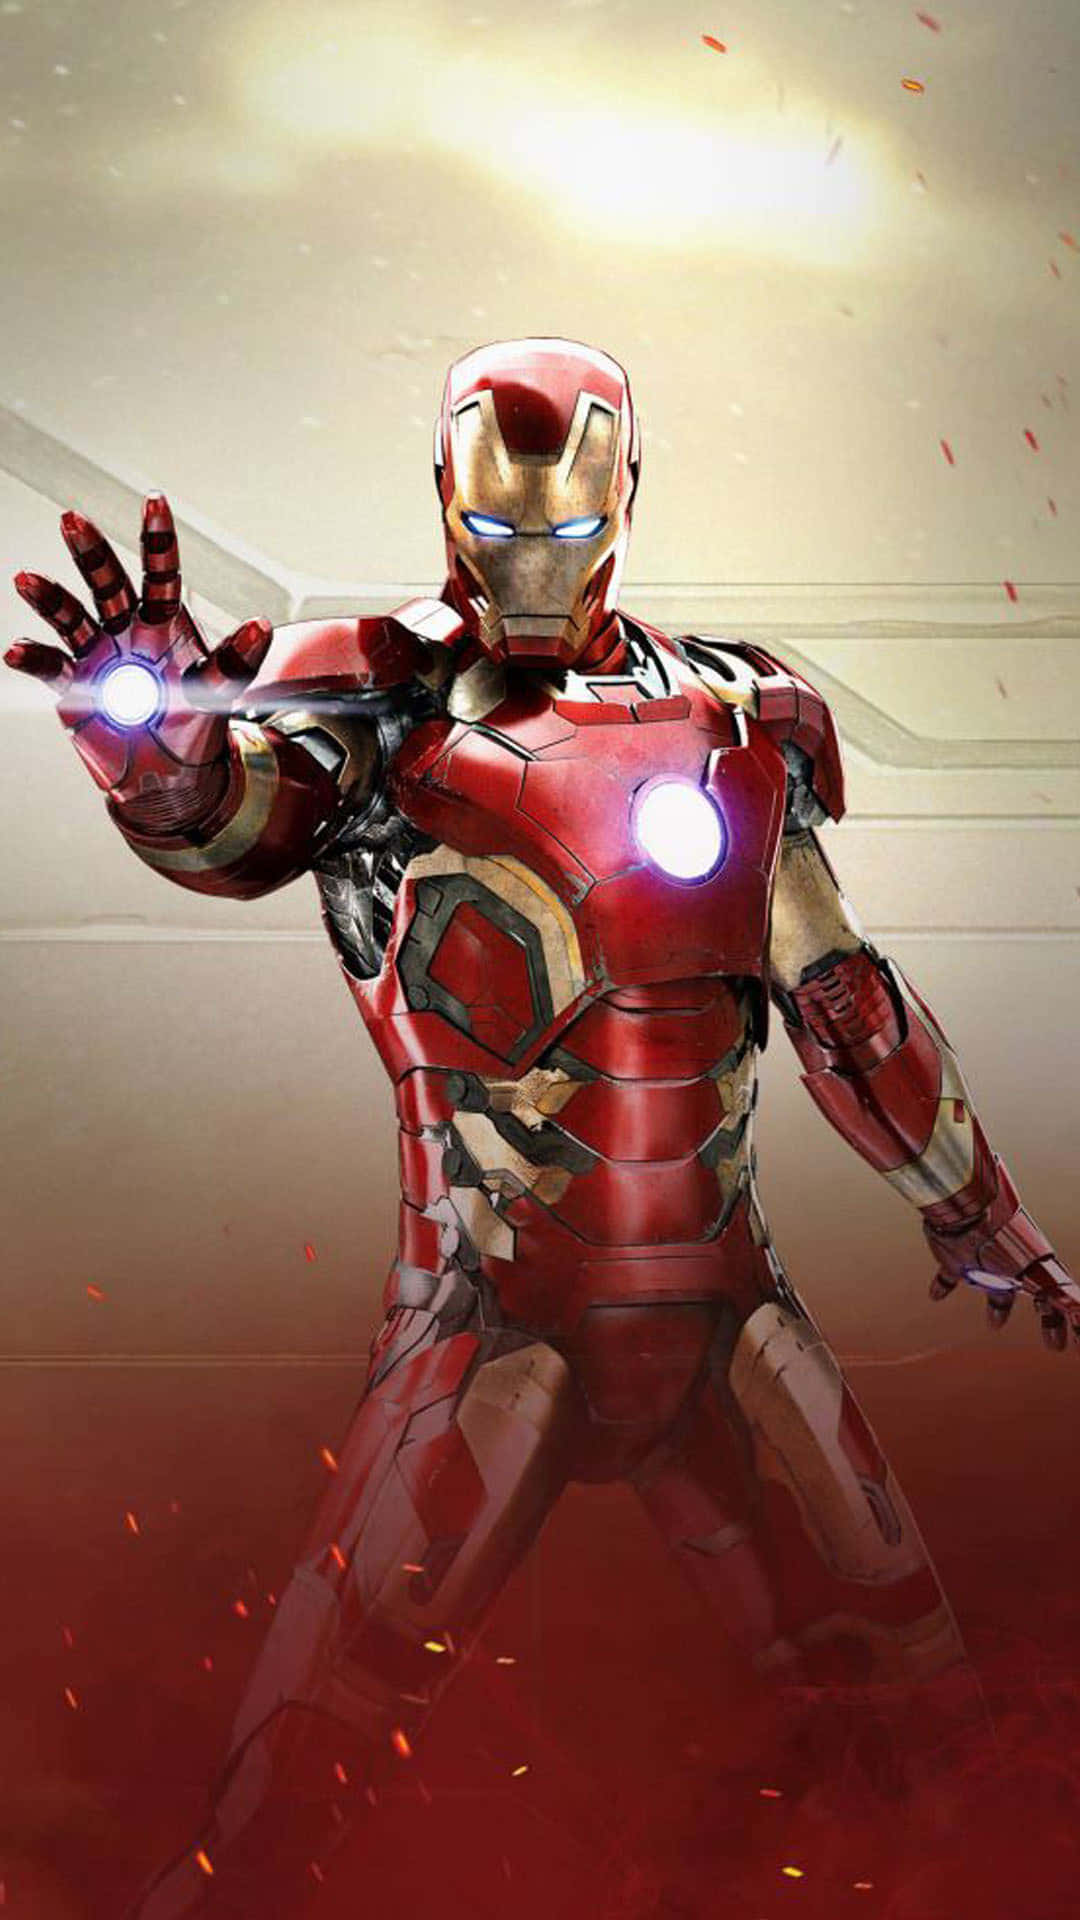 Cool Iron Man Fighting Stance Iphone Wallpaper